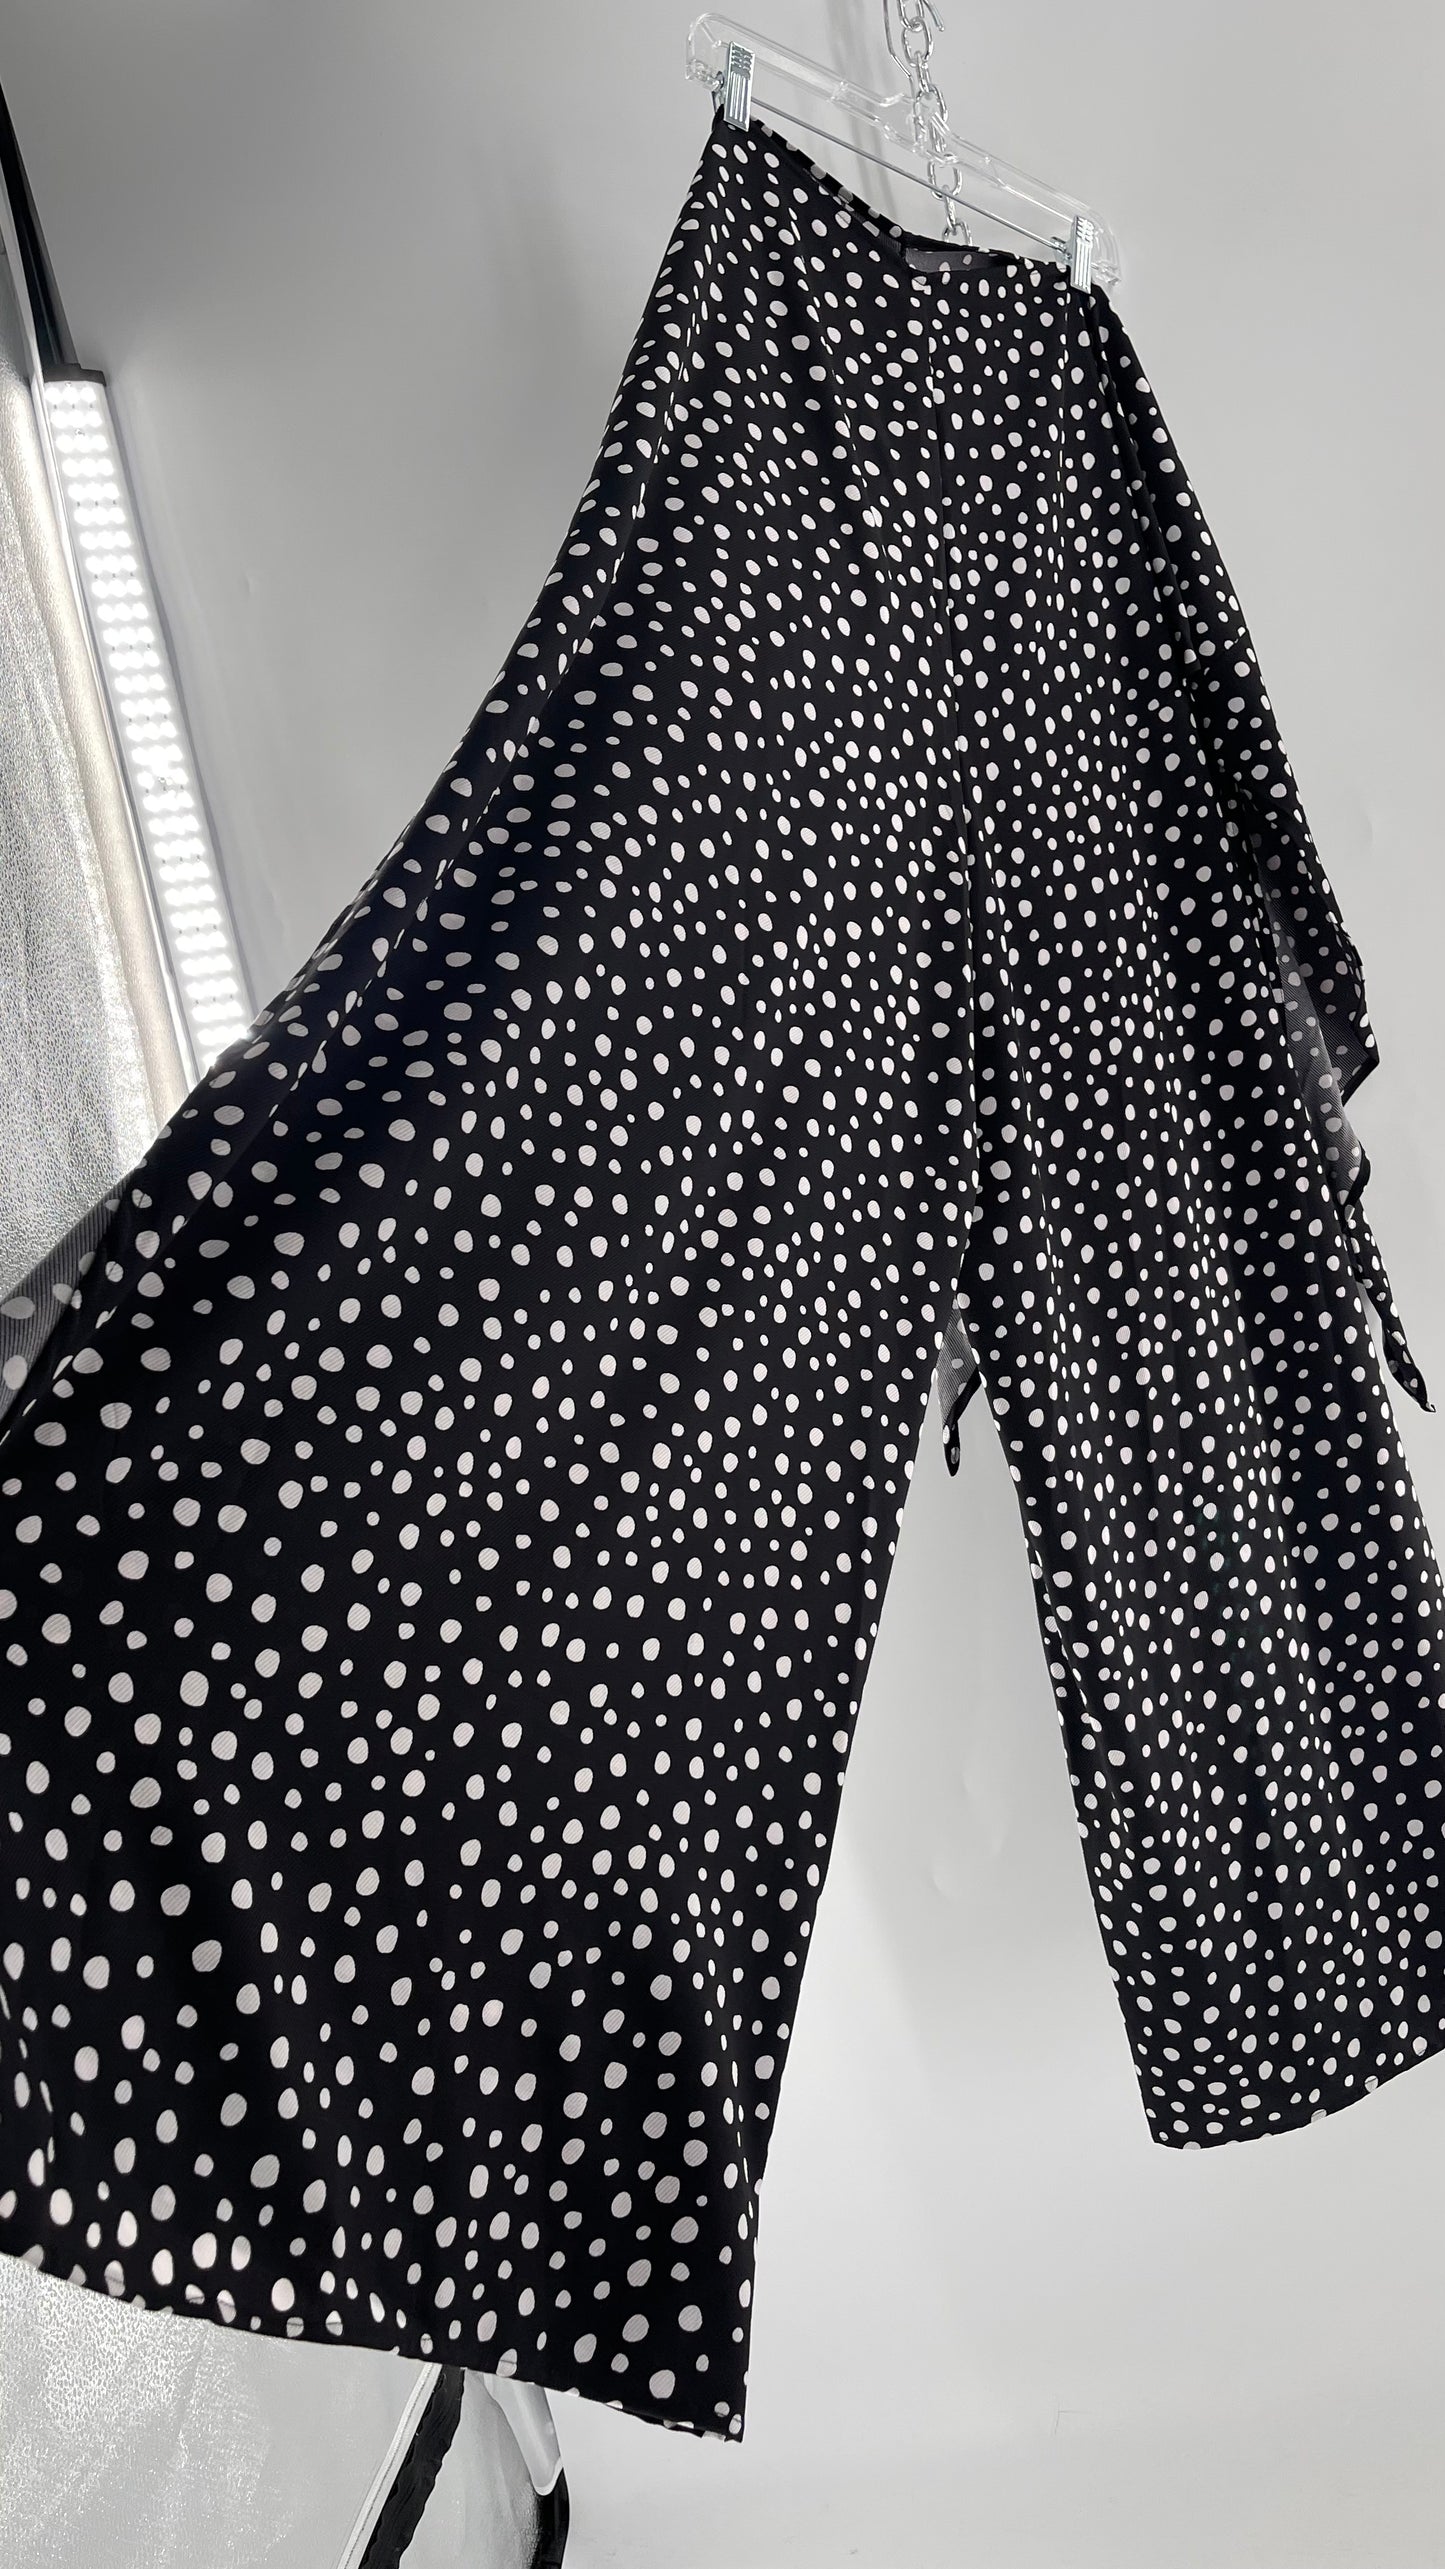 Handmade 9 in 1 Jumpsuit Covered in Black/White Dalmatian Polka Dot Pattern (One Size) •AS SEEN ON TIKTOK•